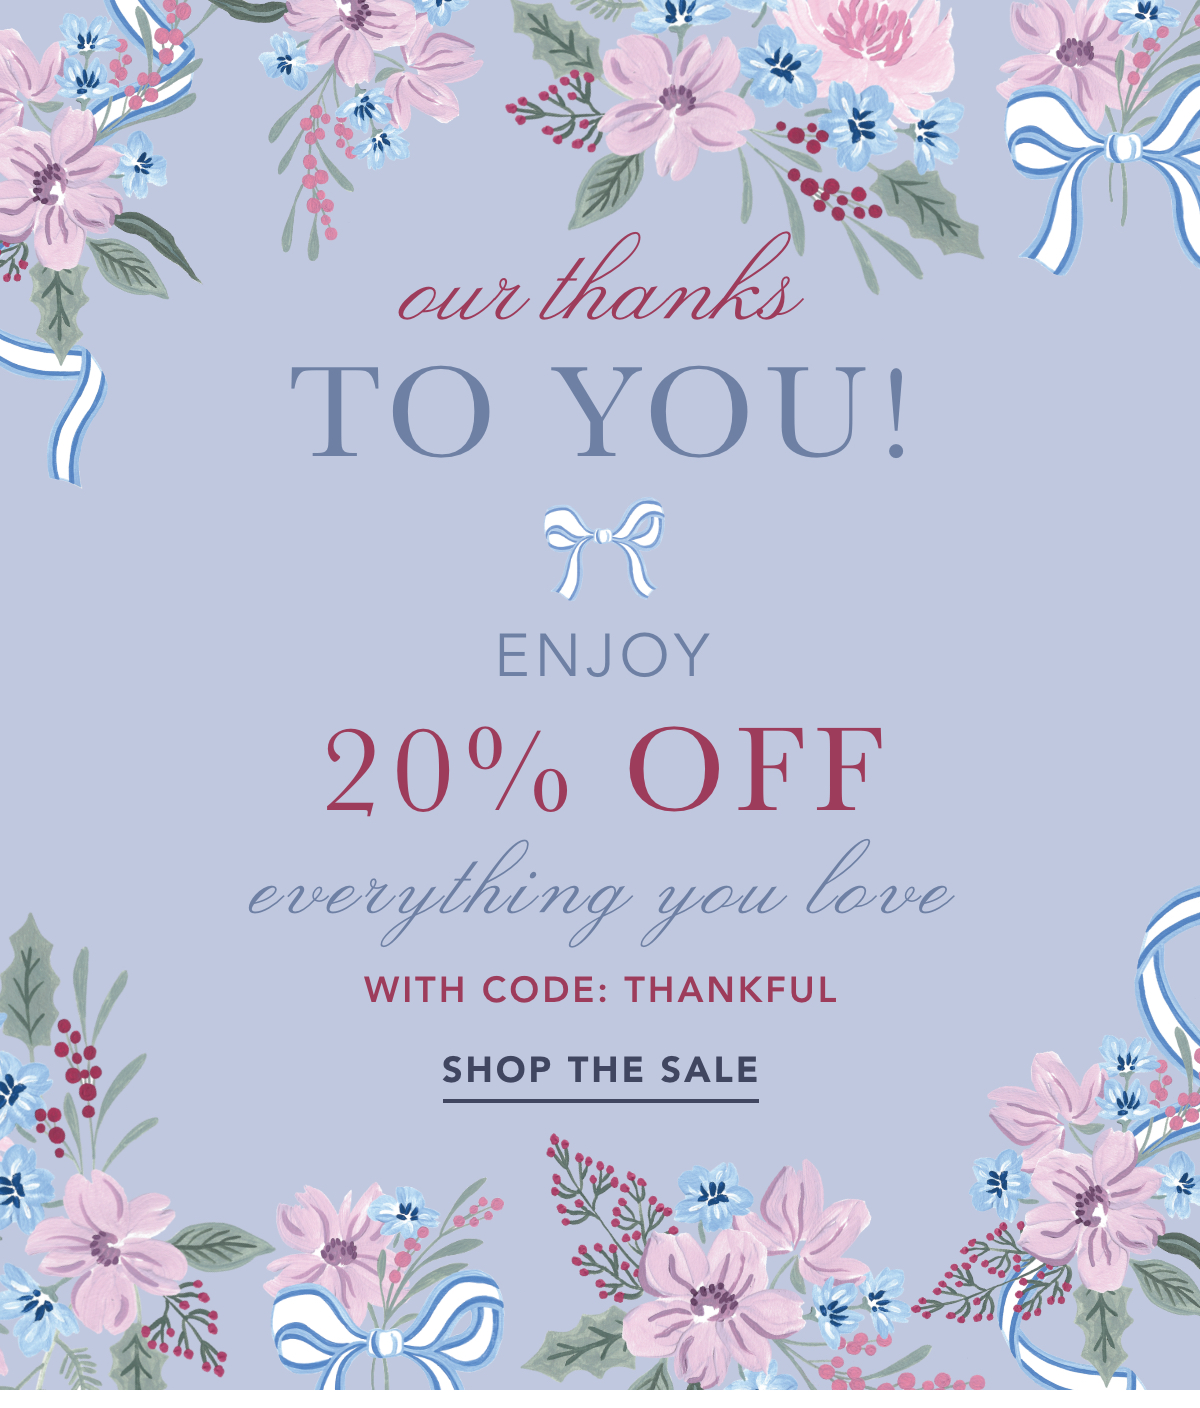 Our thanks to you! Enjoy 20% off everything you love with code: THANKFUL